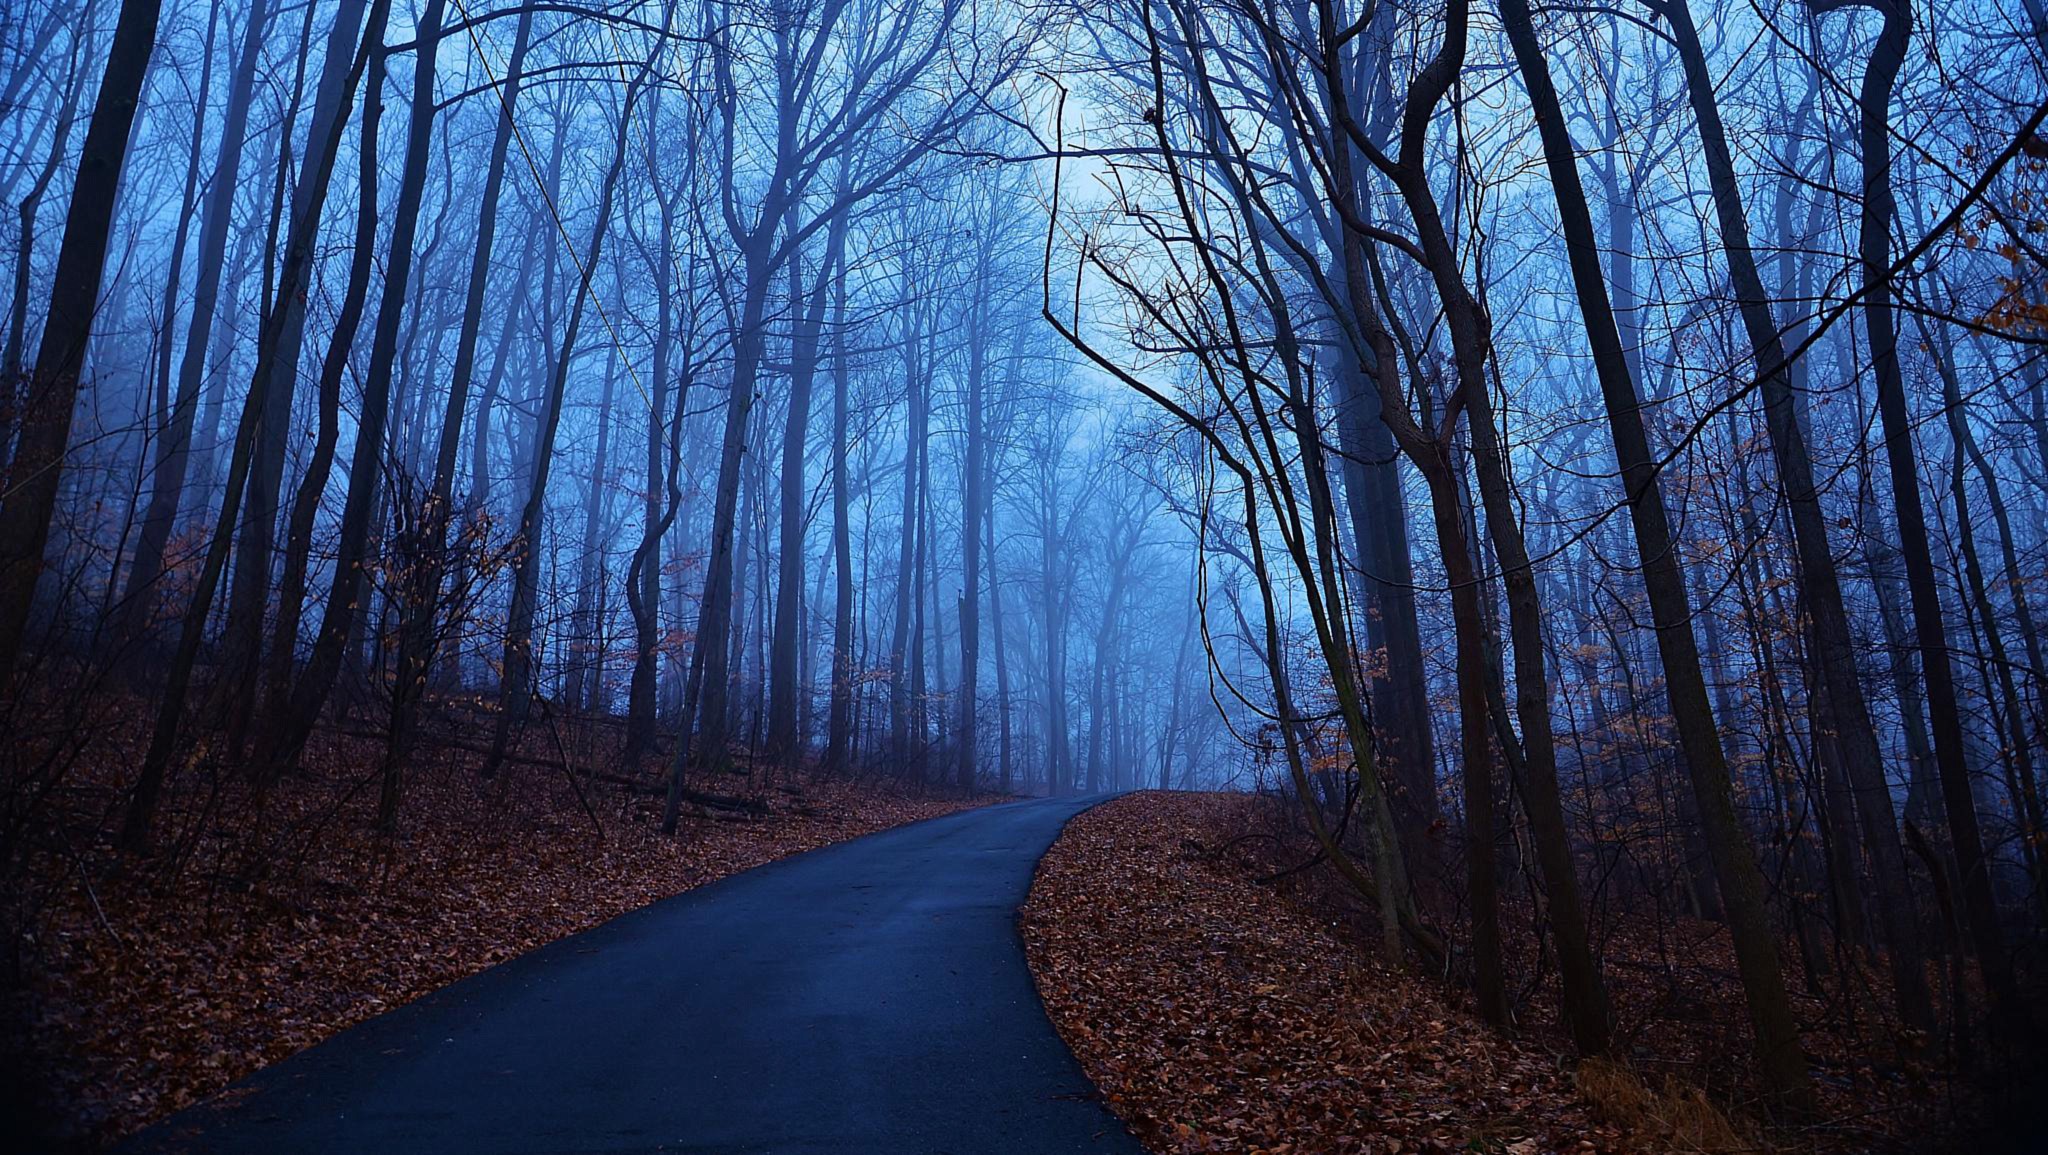 General 2048x1155 road forest fall mist trees leaves blue overcast